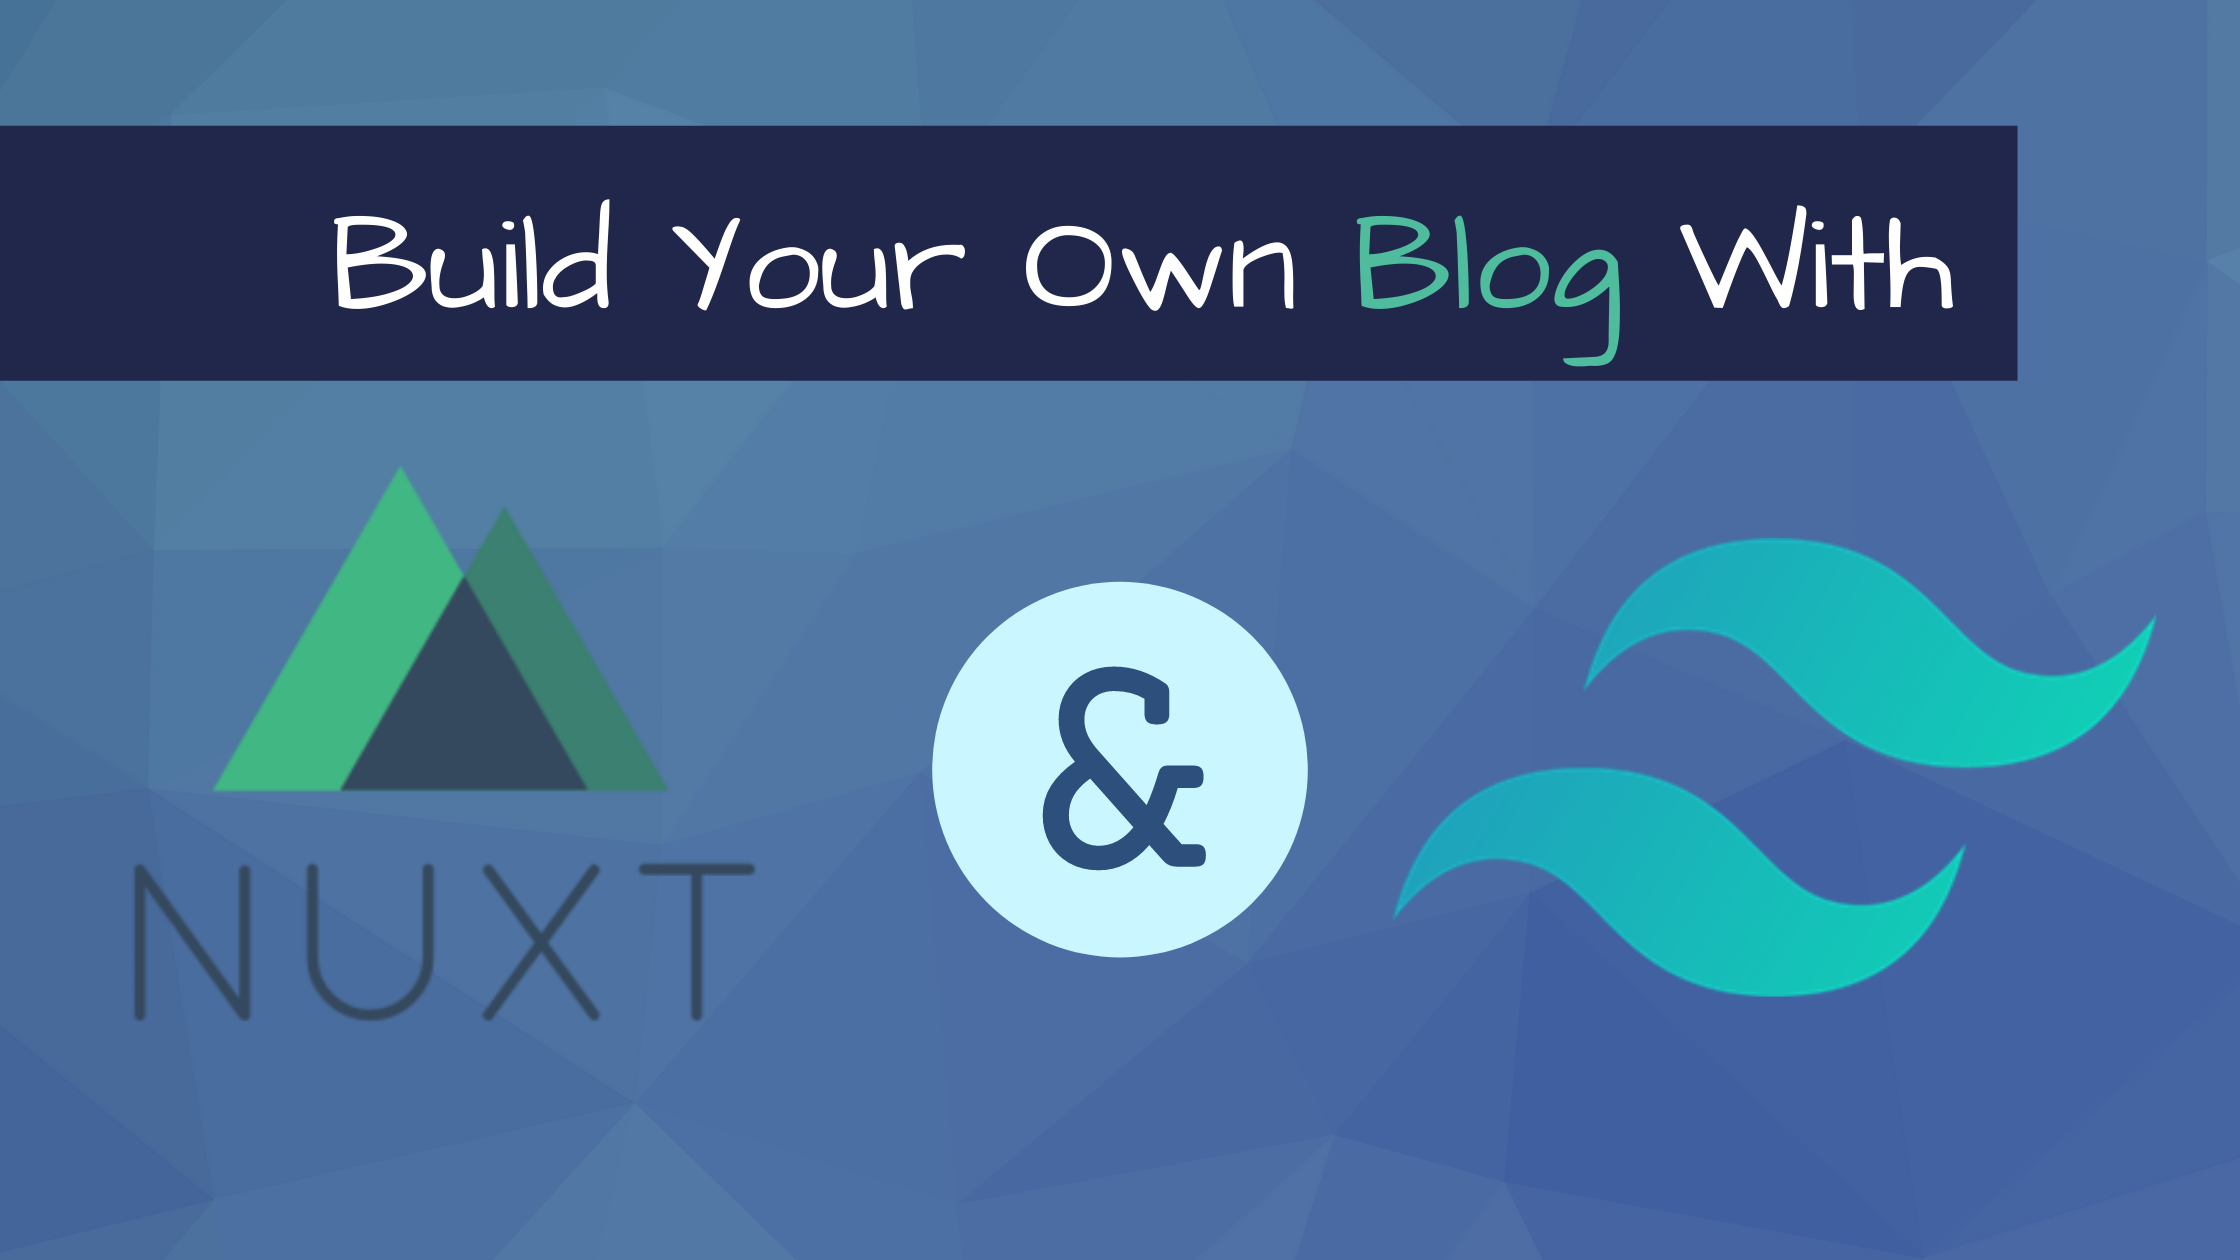 Building Your Own Blog with Nuxt Content and Tailwind